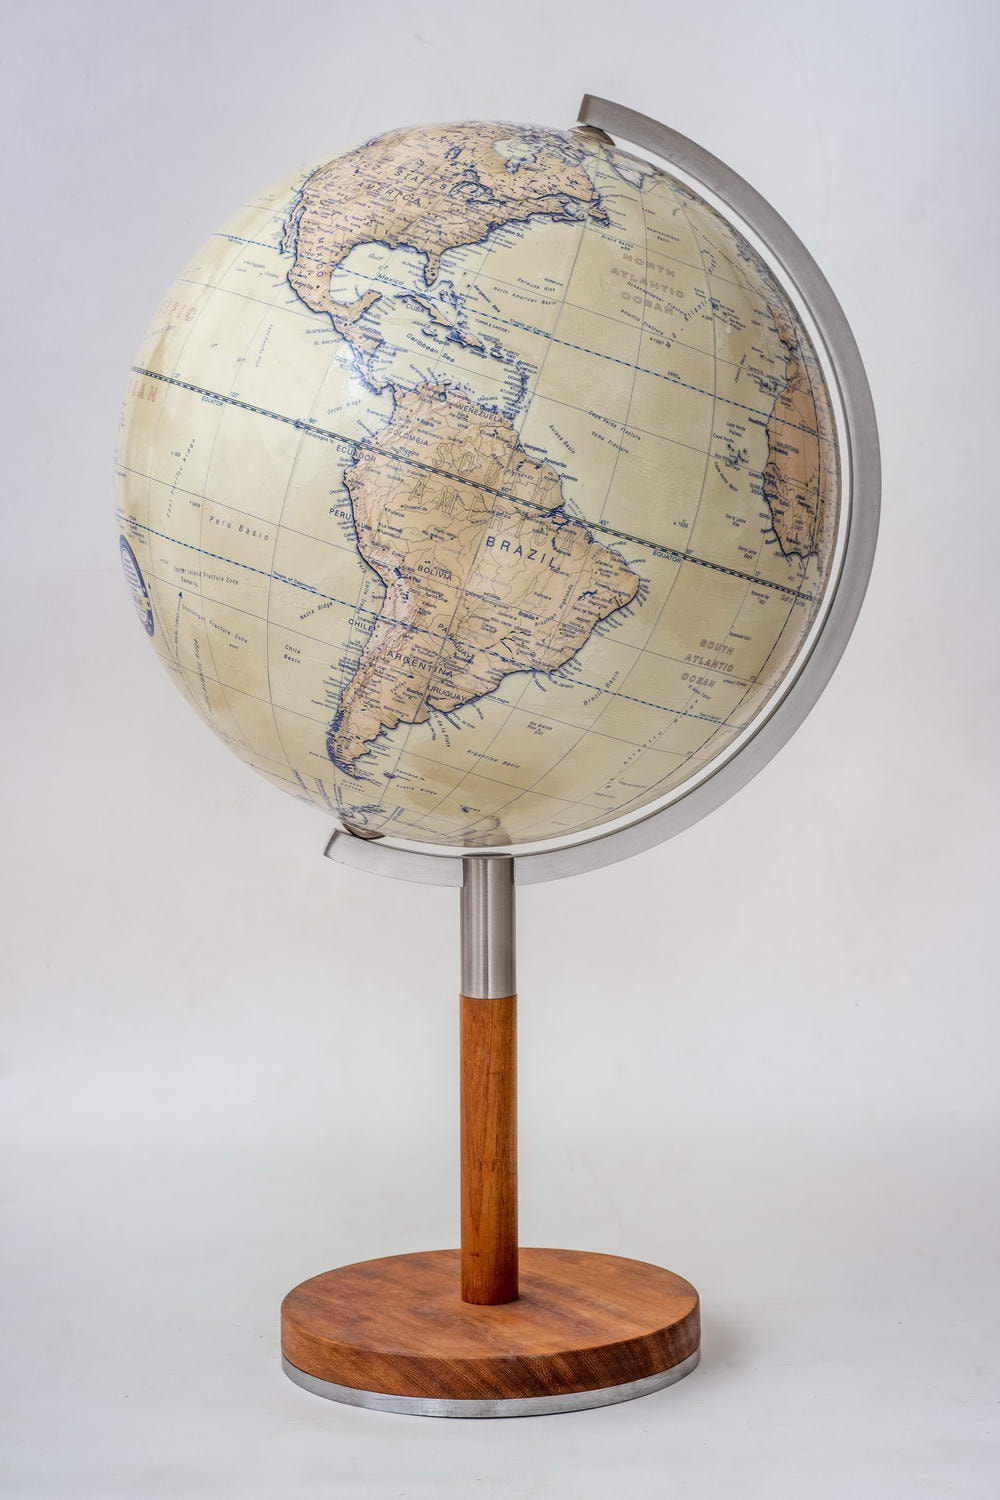 Lander and May Nordic globe with stylish contemporary wood stand . globe shows Brazil